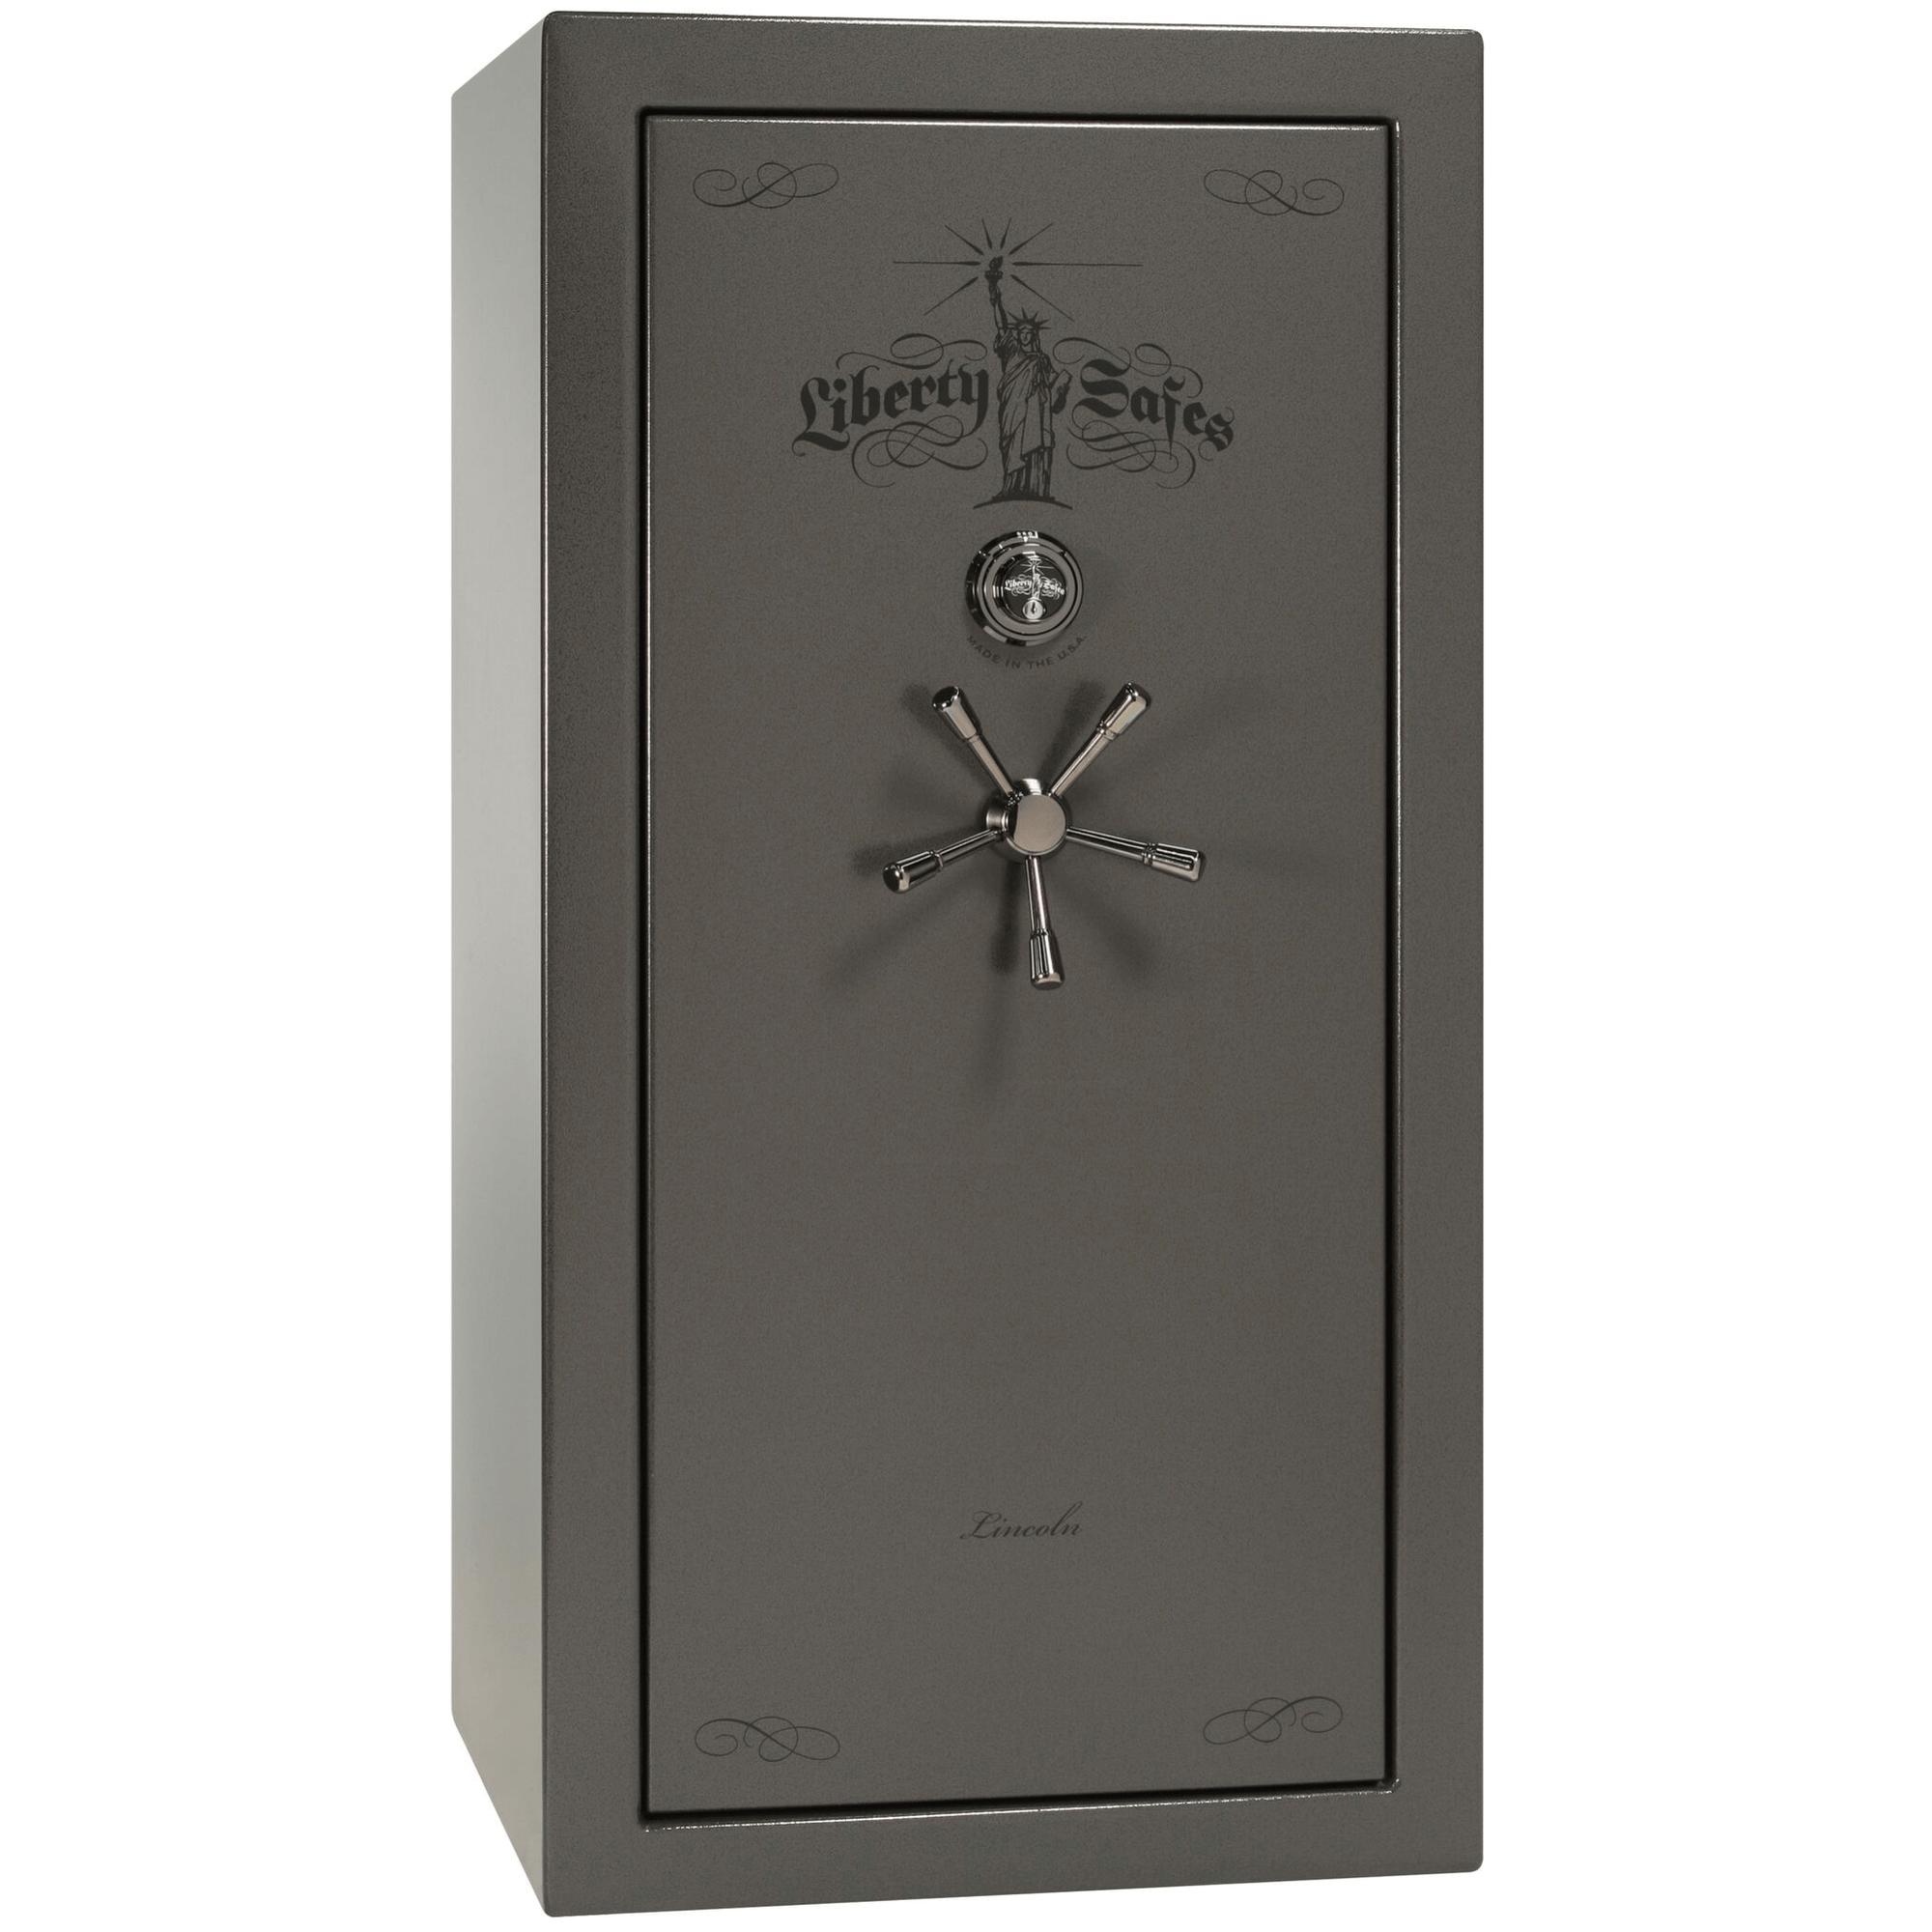 Lincoln Series | Level 5 Security | 110 Minute Fire Protection | 40 | Dimensions: 66.5"(H) x 36"(W) x 32"(D) | Bronze Textured | Mechanical Lock